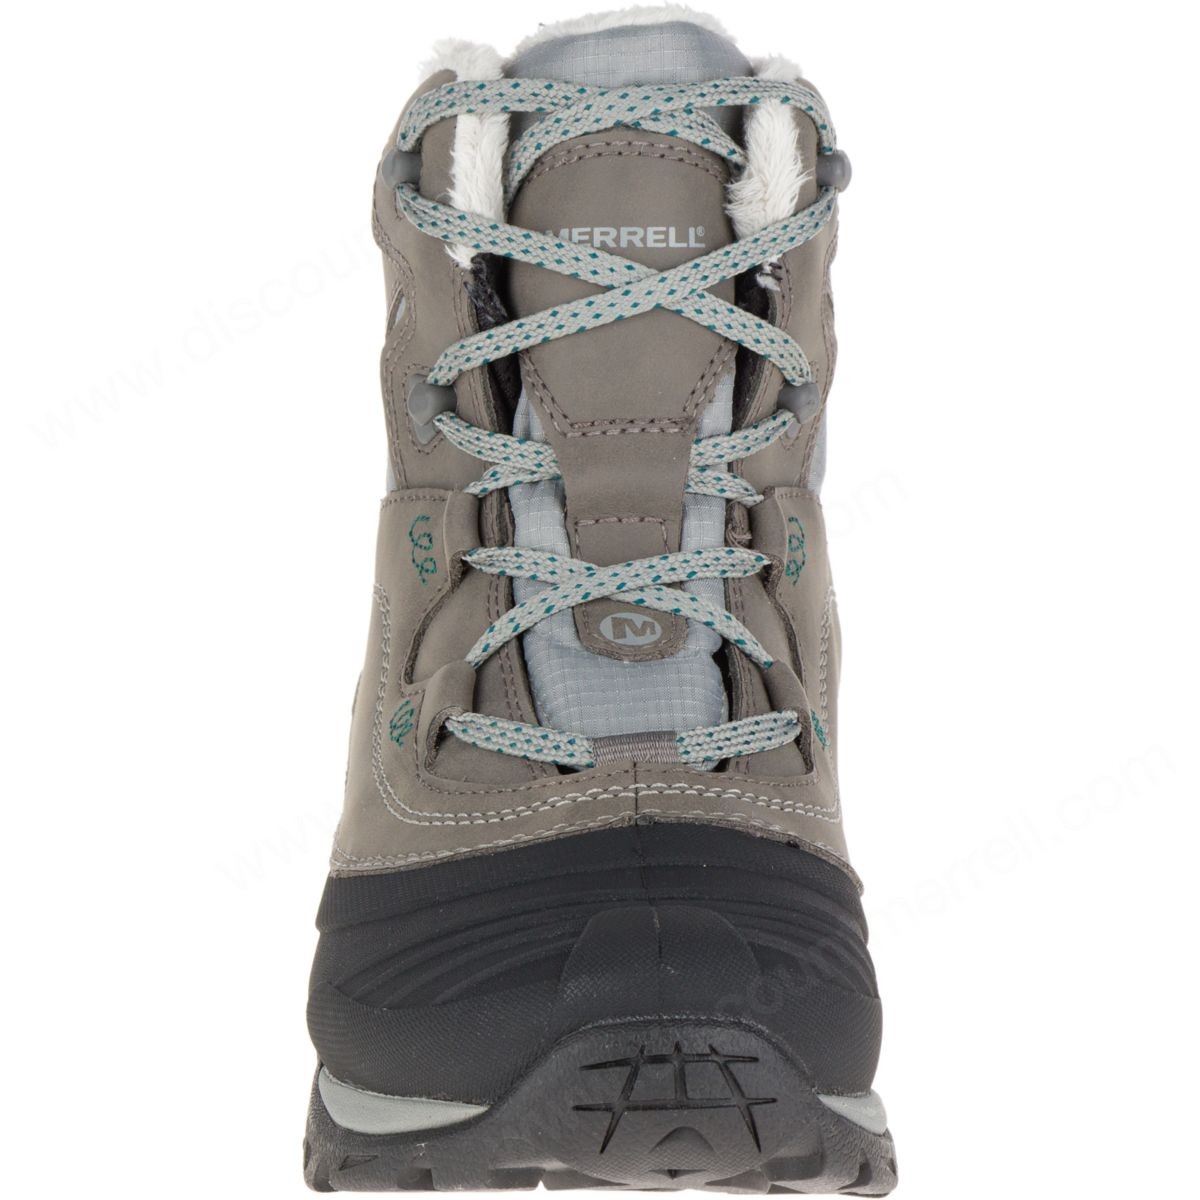 Merrell Lady's Snowbound Mid Waterproof Charcoal - -4